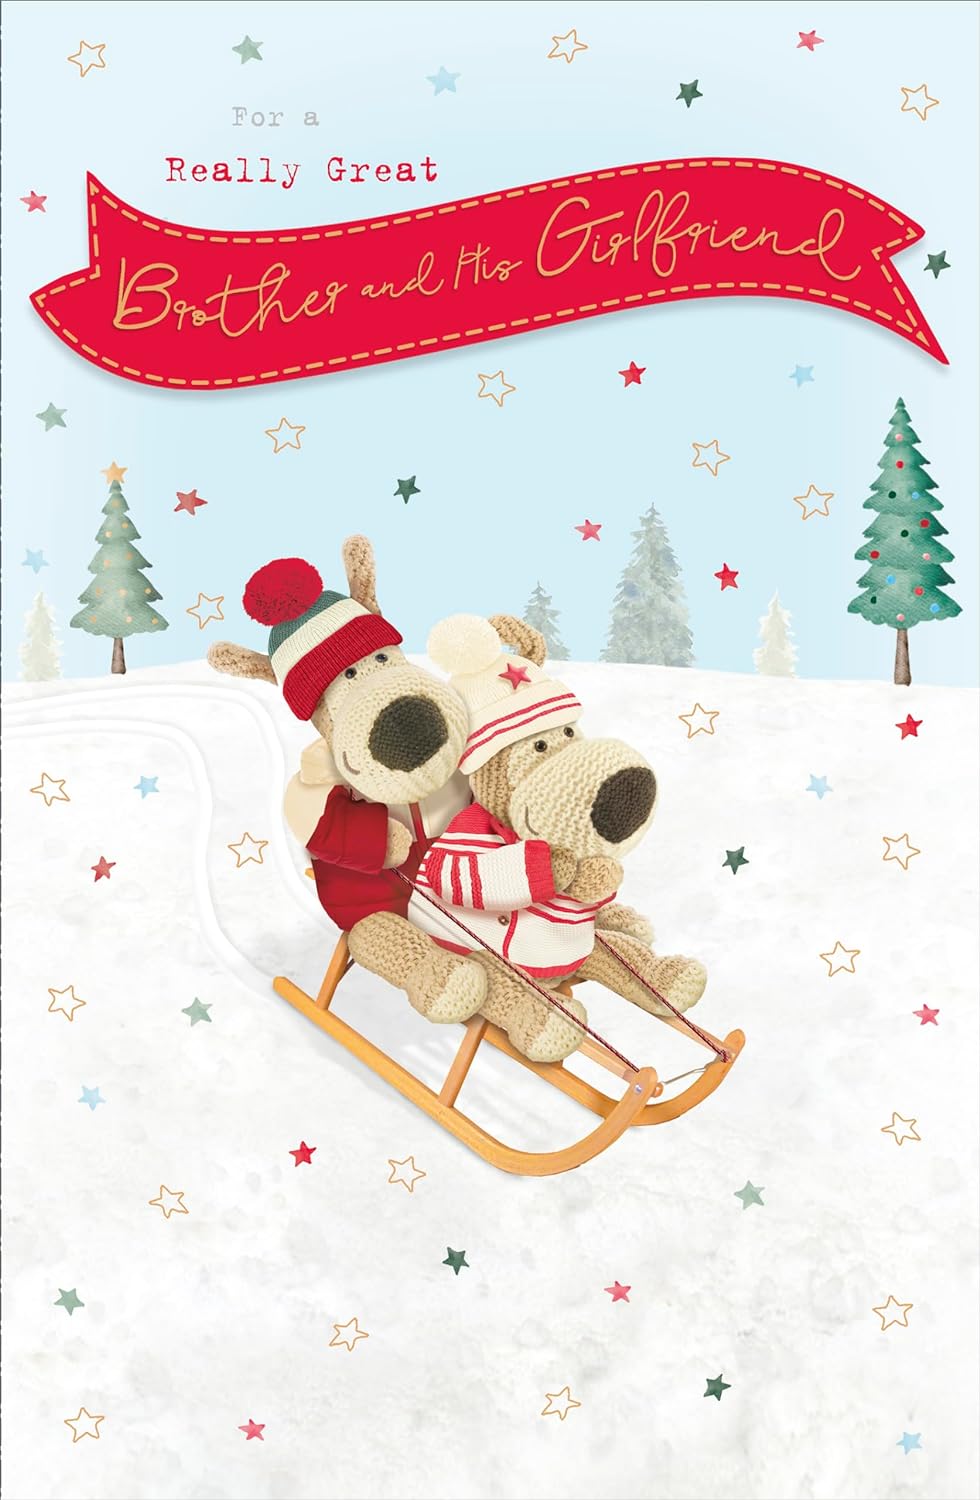 For A Great Brother & Girlfriend Christmas Card Boofle